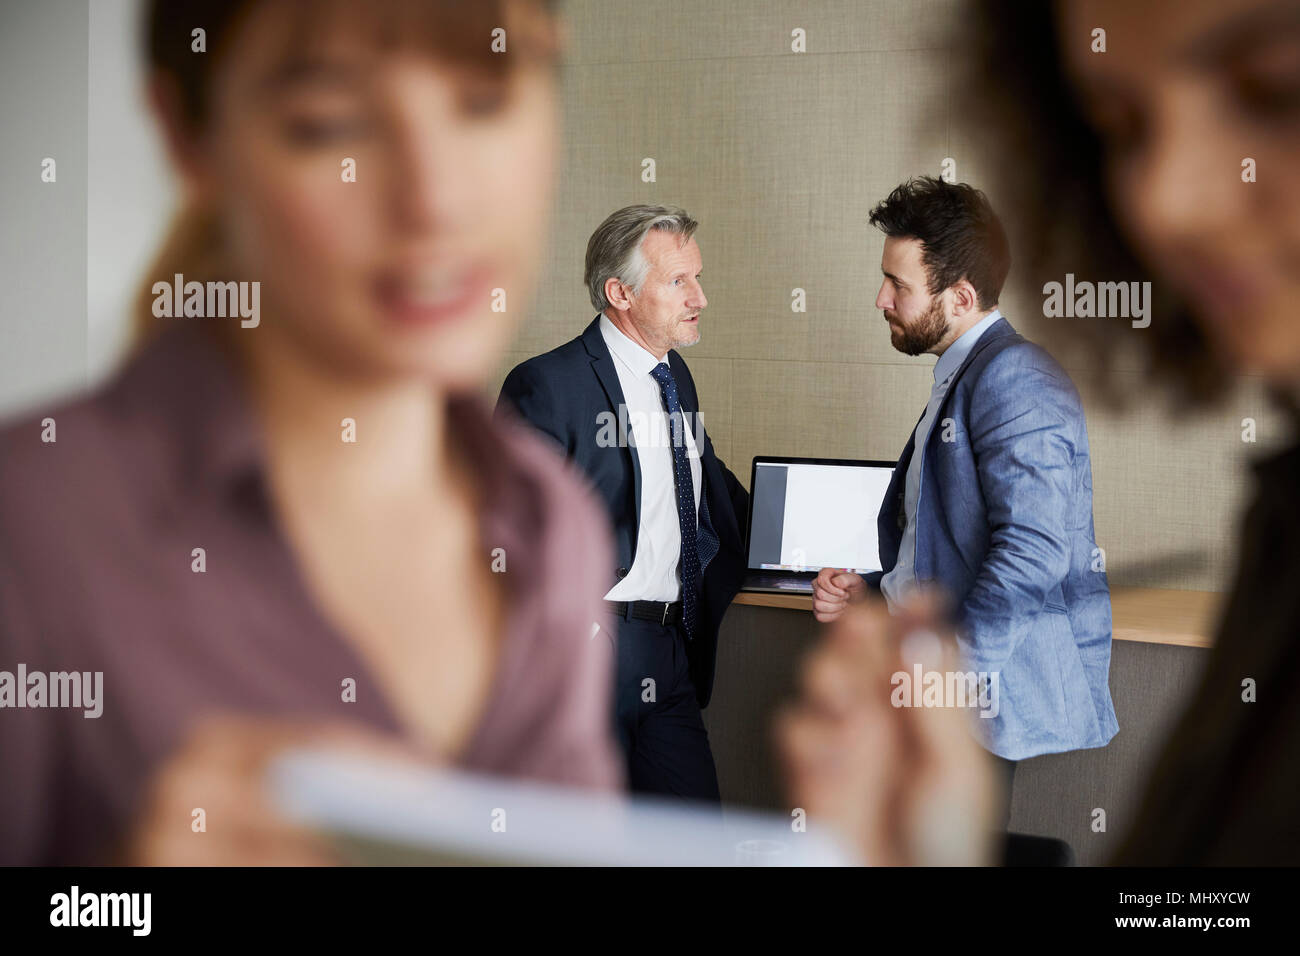 Colleagues in office chatting, focus on background Stock Photo